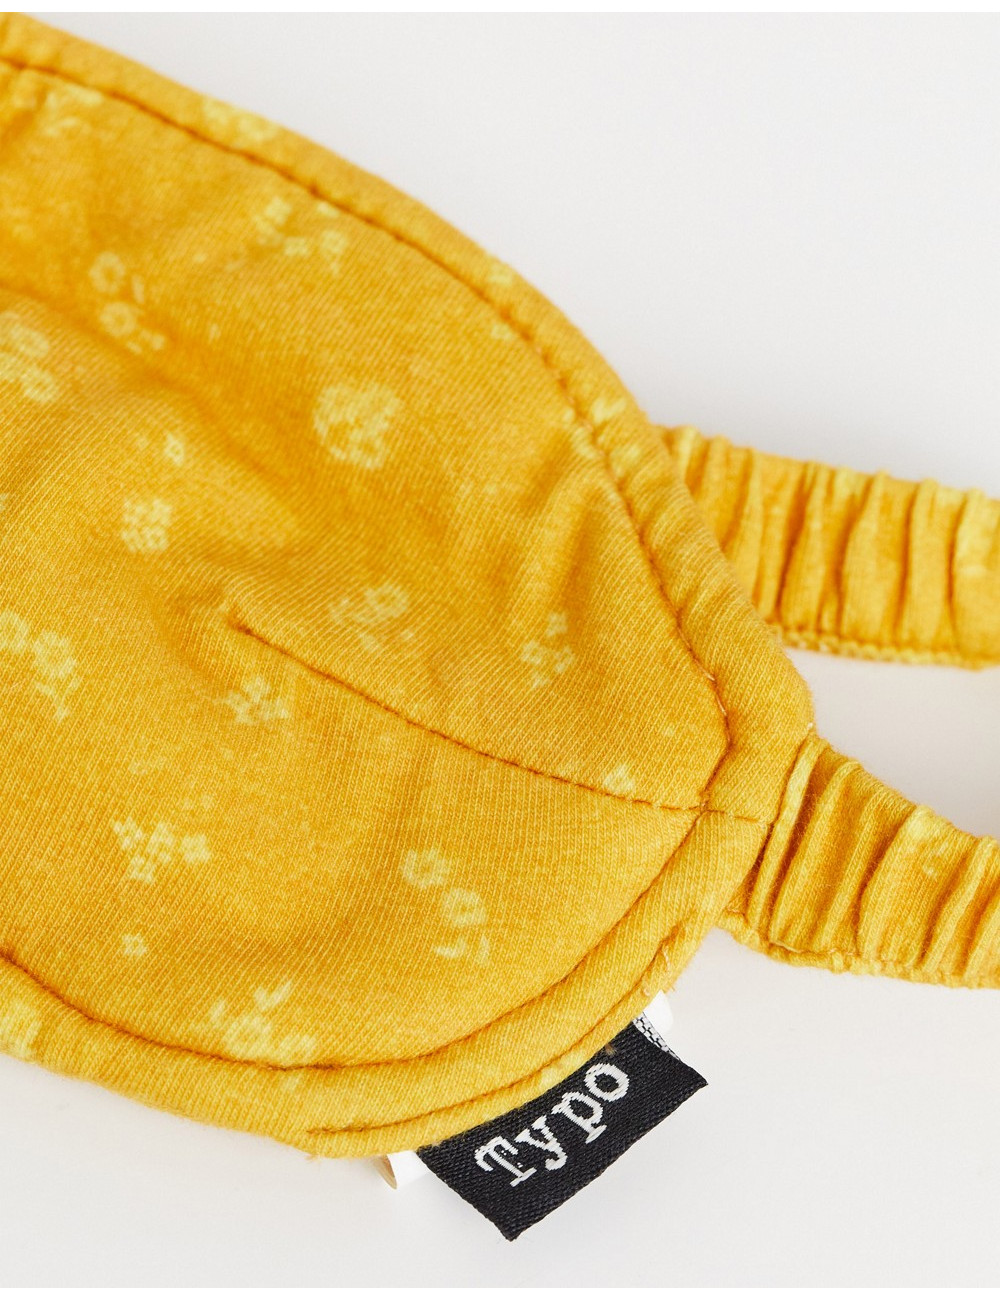 Typo eye mask with pouch...